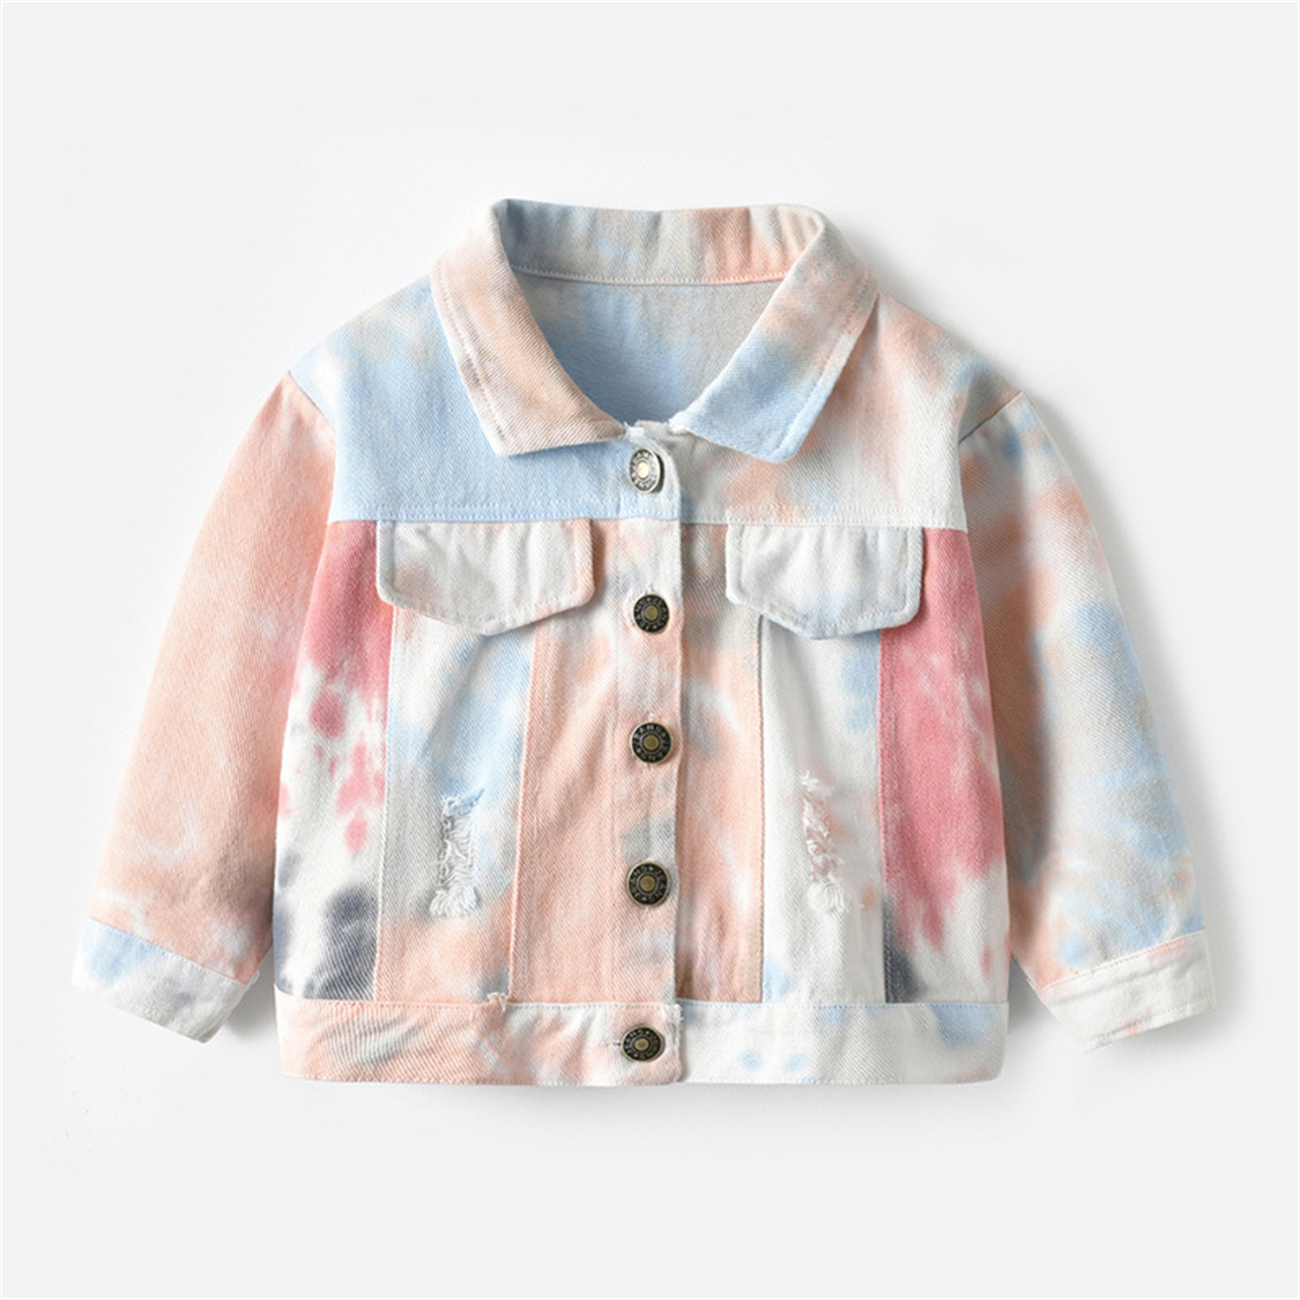 Toddler Tie-dye Denim Jean Jacket for Girls Boys Size 1-7T Single-breasted Mid-length Jacket for Spring Fall,Beige,6-9 Months - image 1 of 1